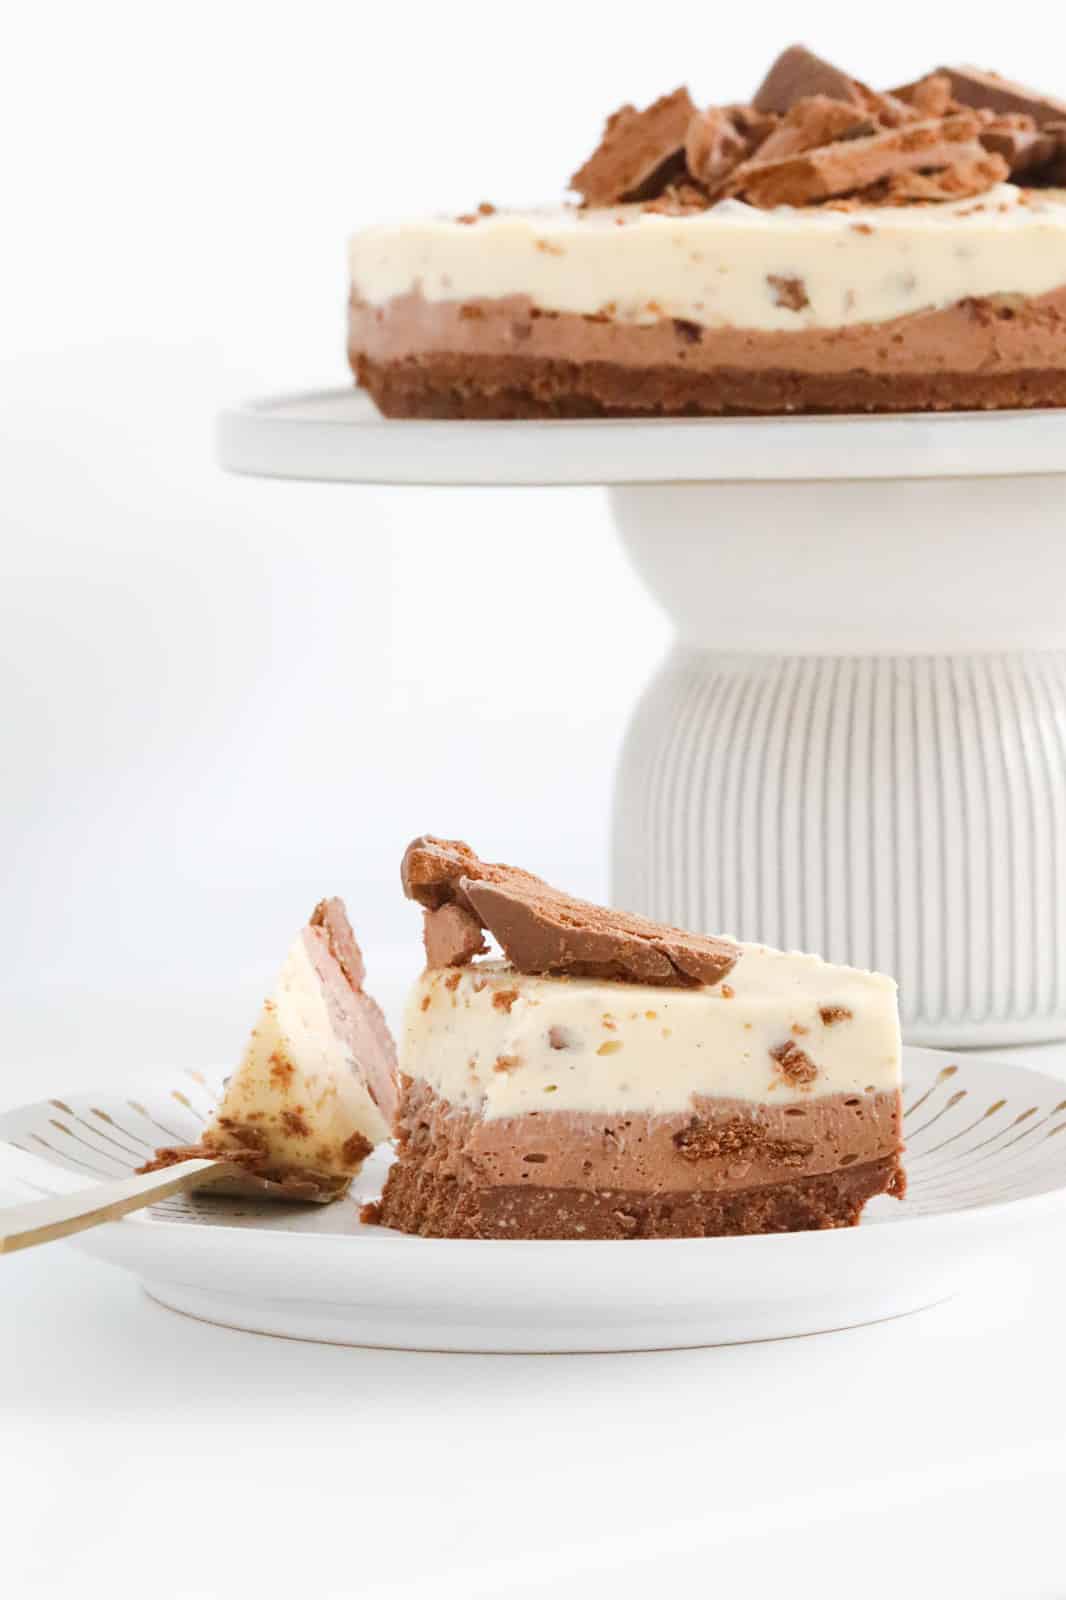 A serve of chocolate cheesecake, with some on a fork.